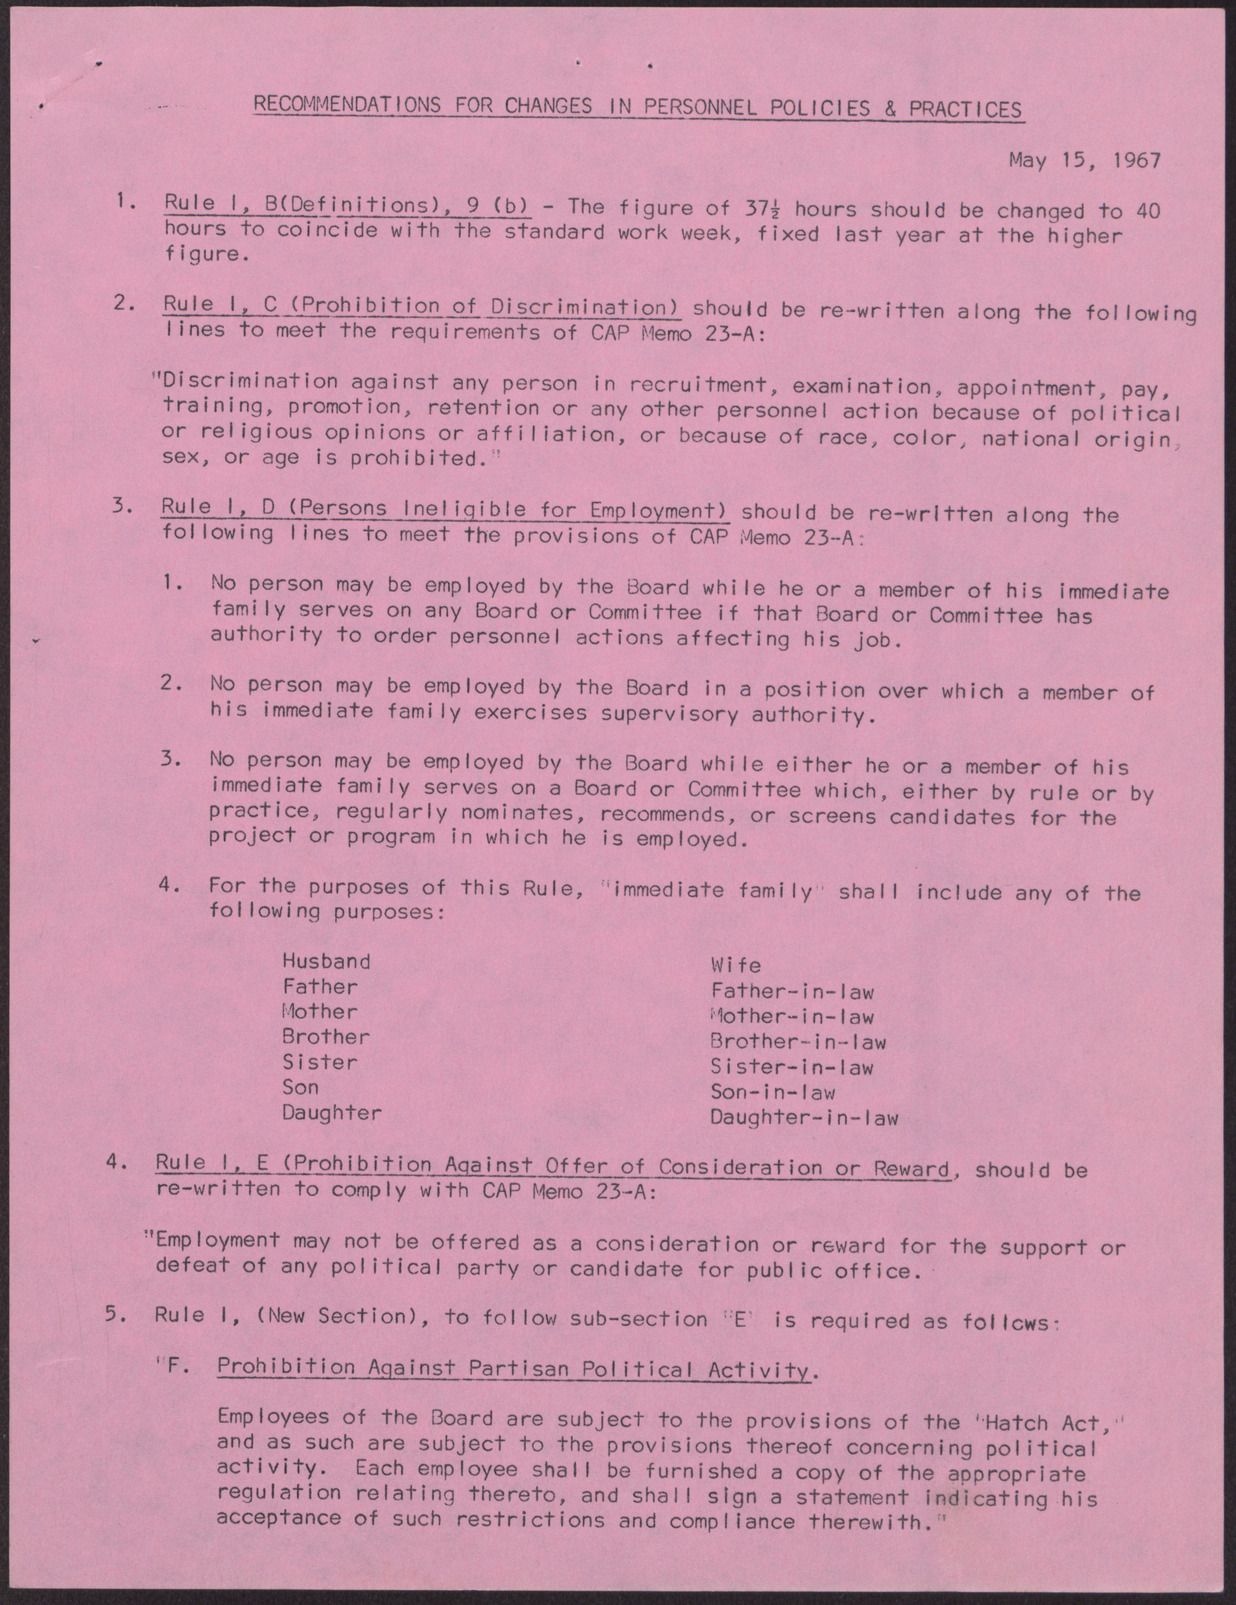 Recommendations for Changes in Personnel Policies and Practices (6 pages), May 15, 1967